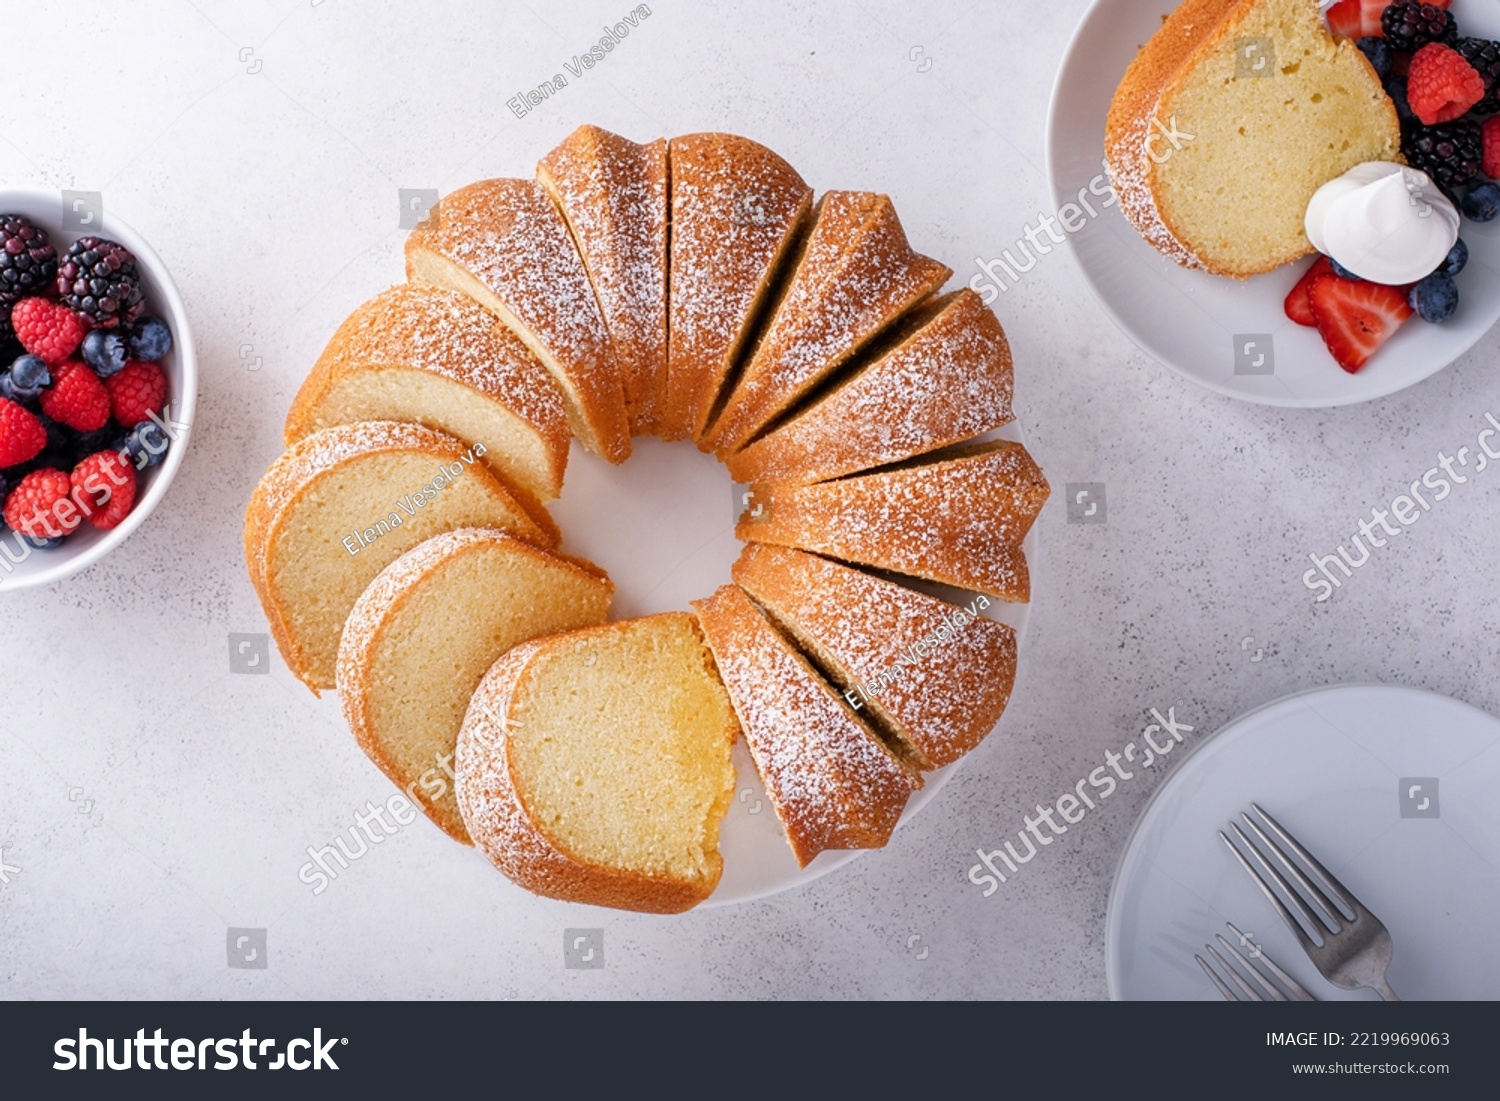 Pound cake baked in a bundt pan, traditional vanilla or sour cream flavor, dusted with powdered sugar #2219969063